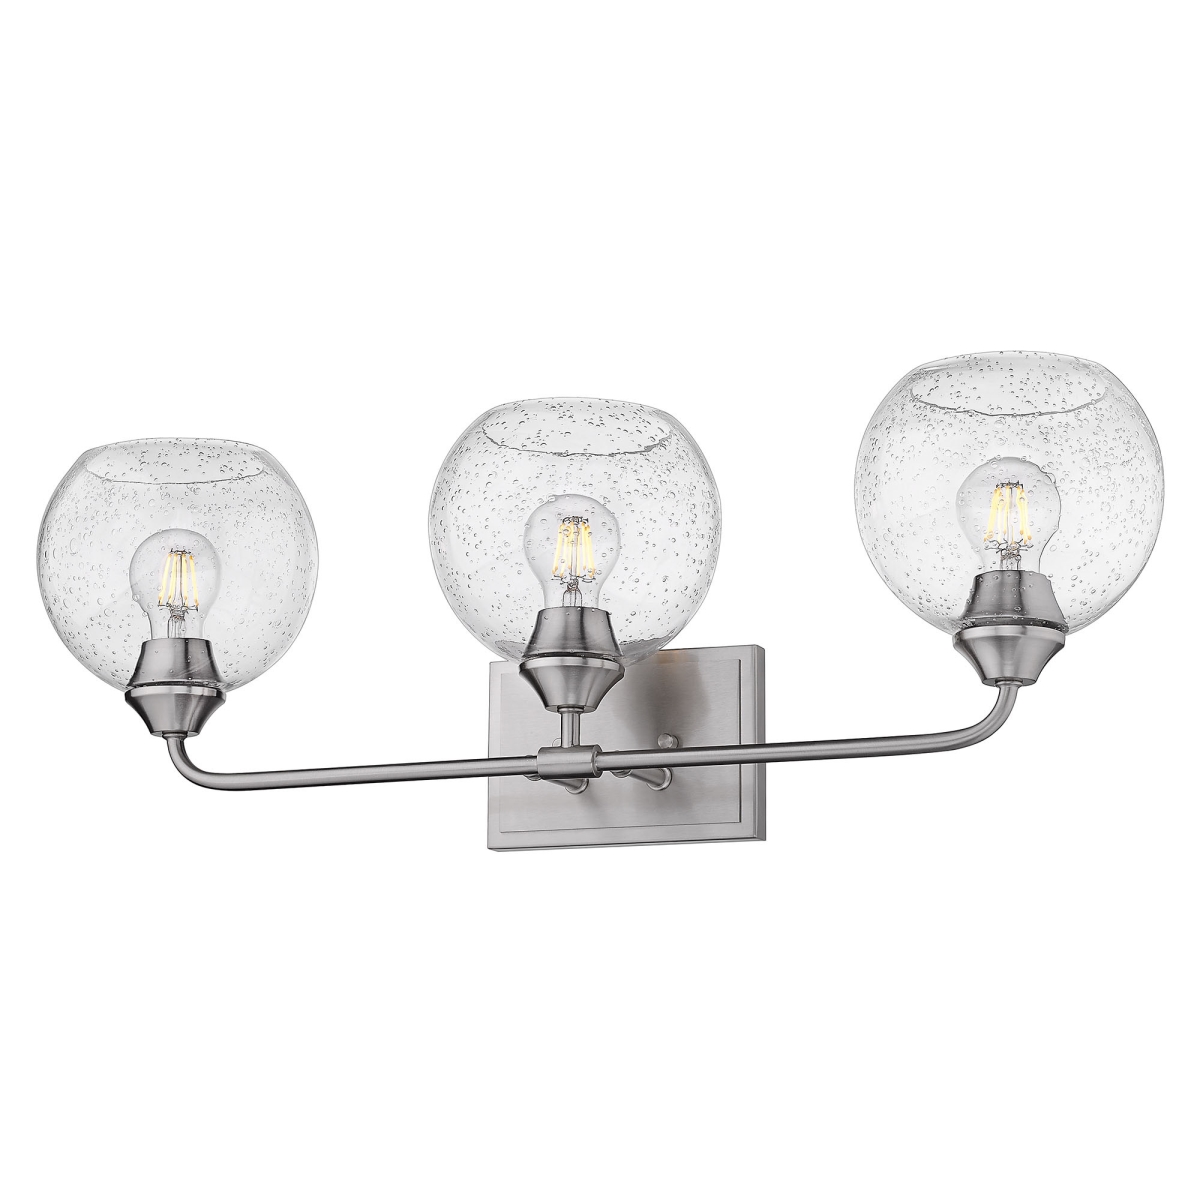 2120-ba3 Pw-globe-sd Ormond 3 Light Bath Vanity In Pewter With Seeded Glass Globe Shade